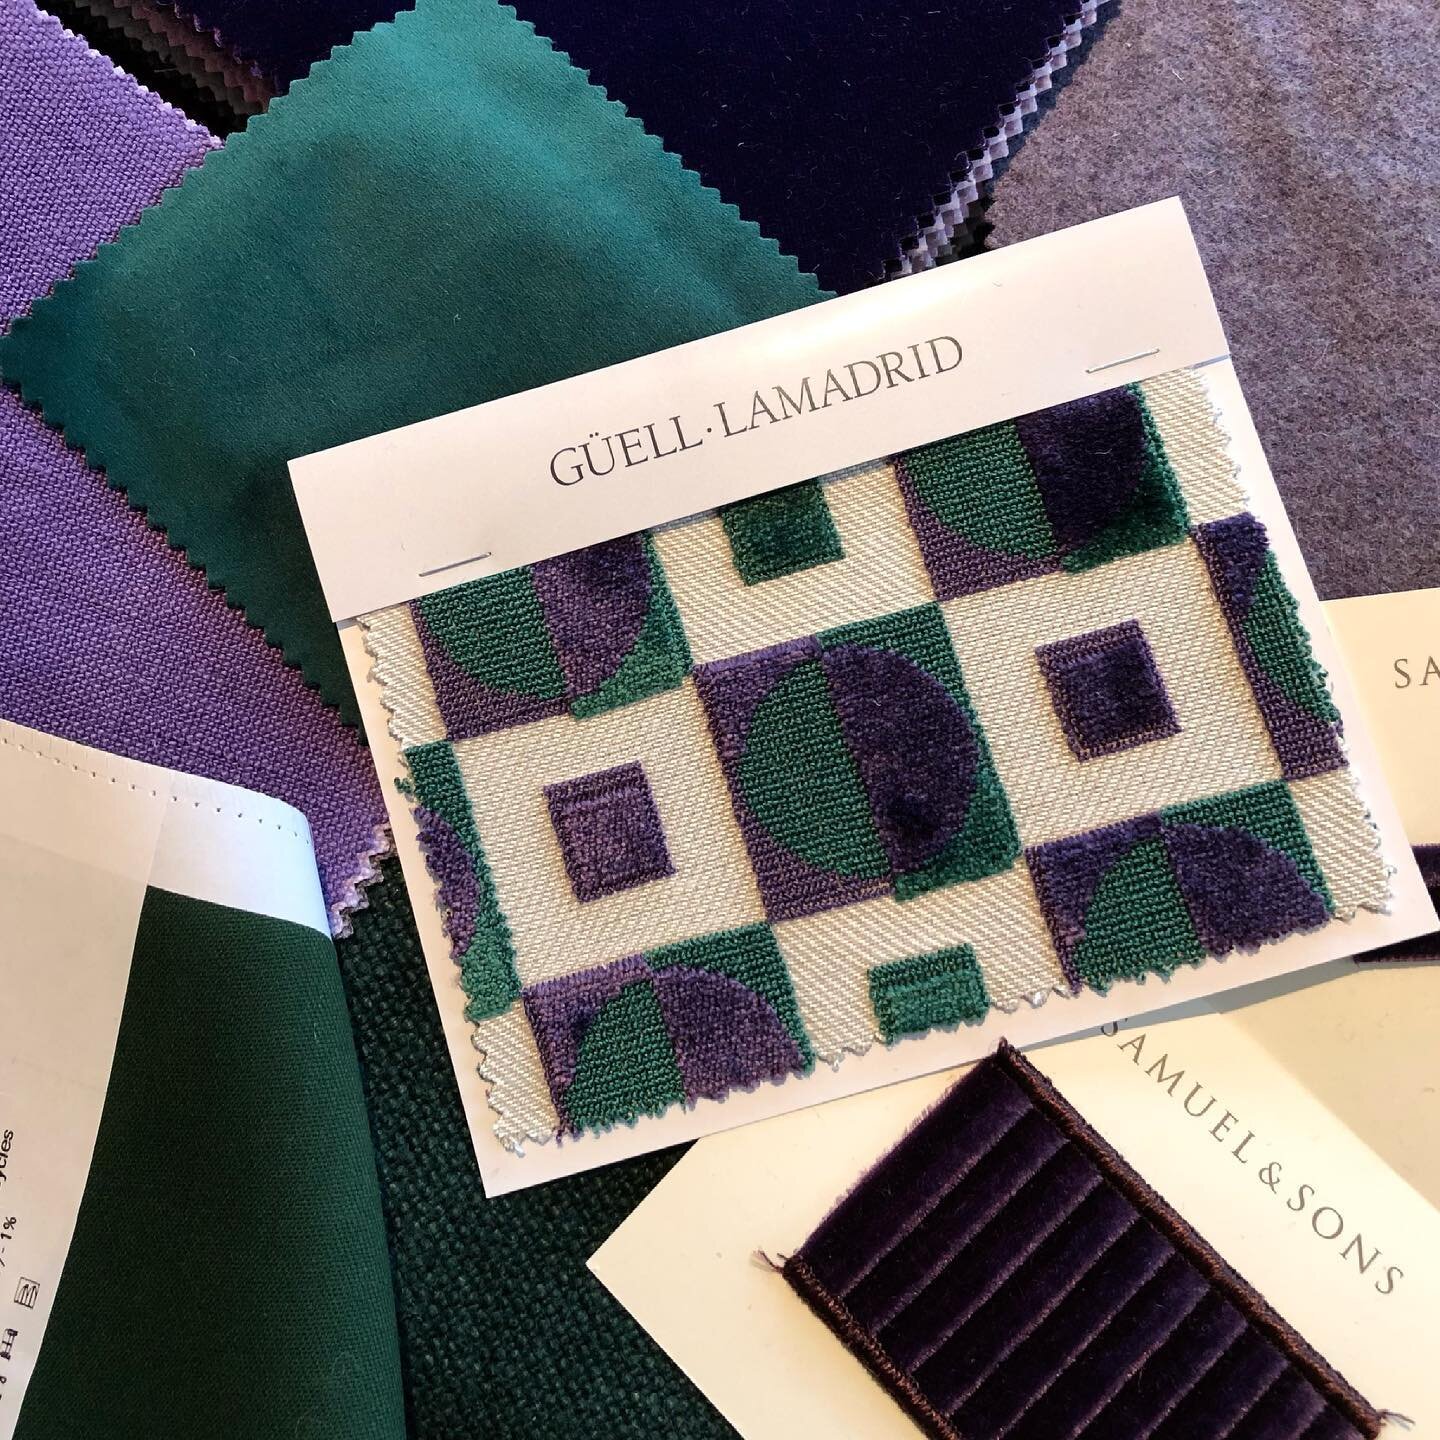 Some Wimbledon inspiration with Guell la Madrid&rsquo;s new fabric taking centre stage for design inspiration this week. #wimbledontennischampionships #colourcombination #inspiredbysports